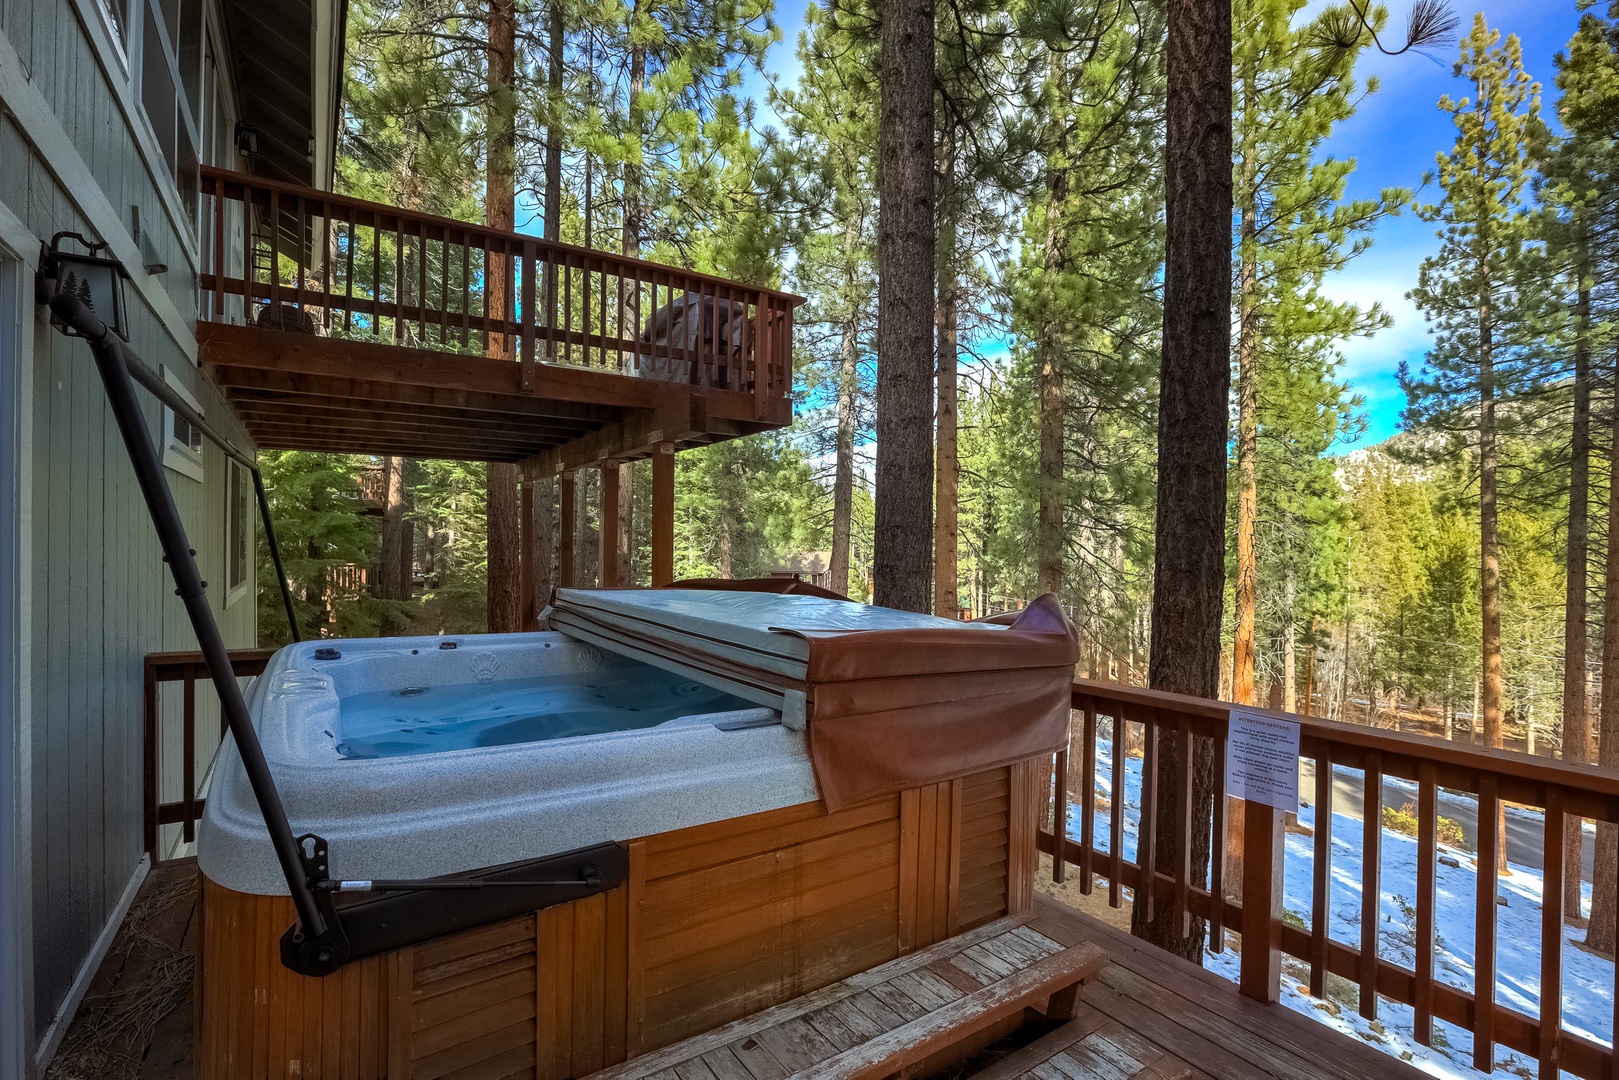 Take a soak in the outdoor hot tub